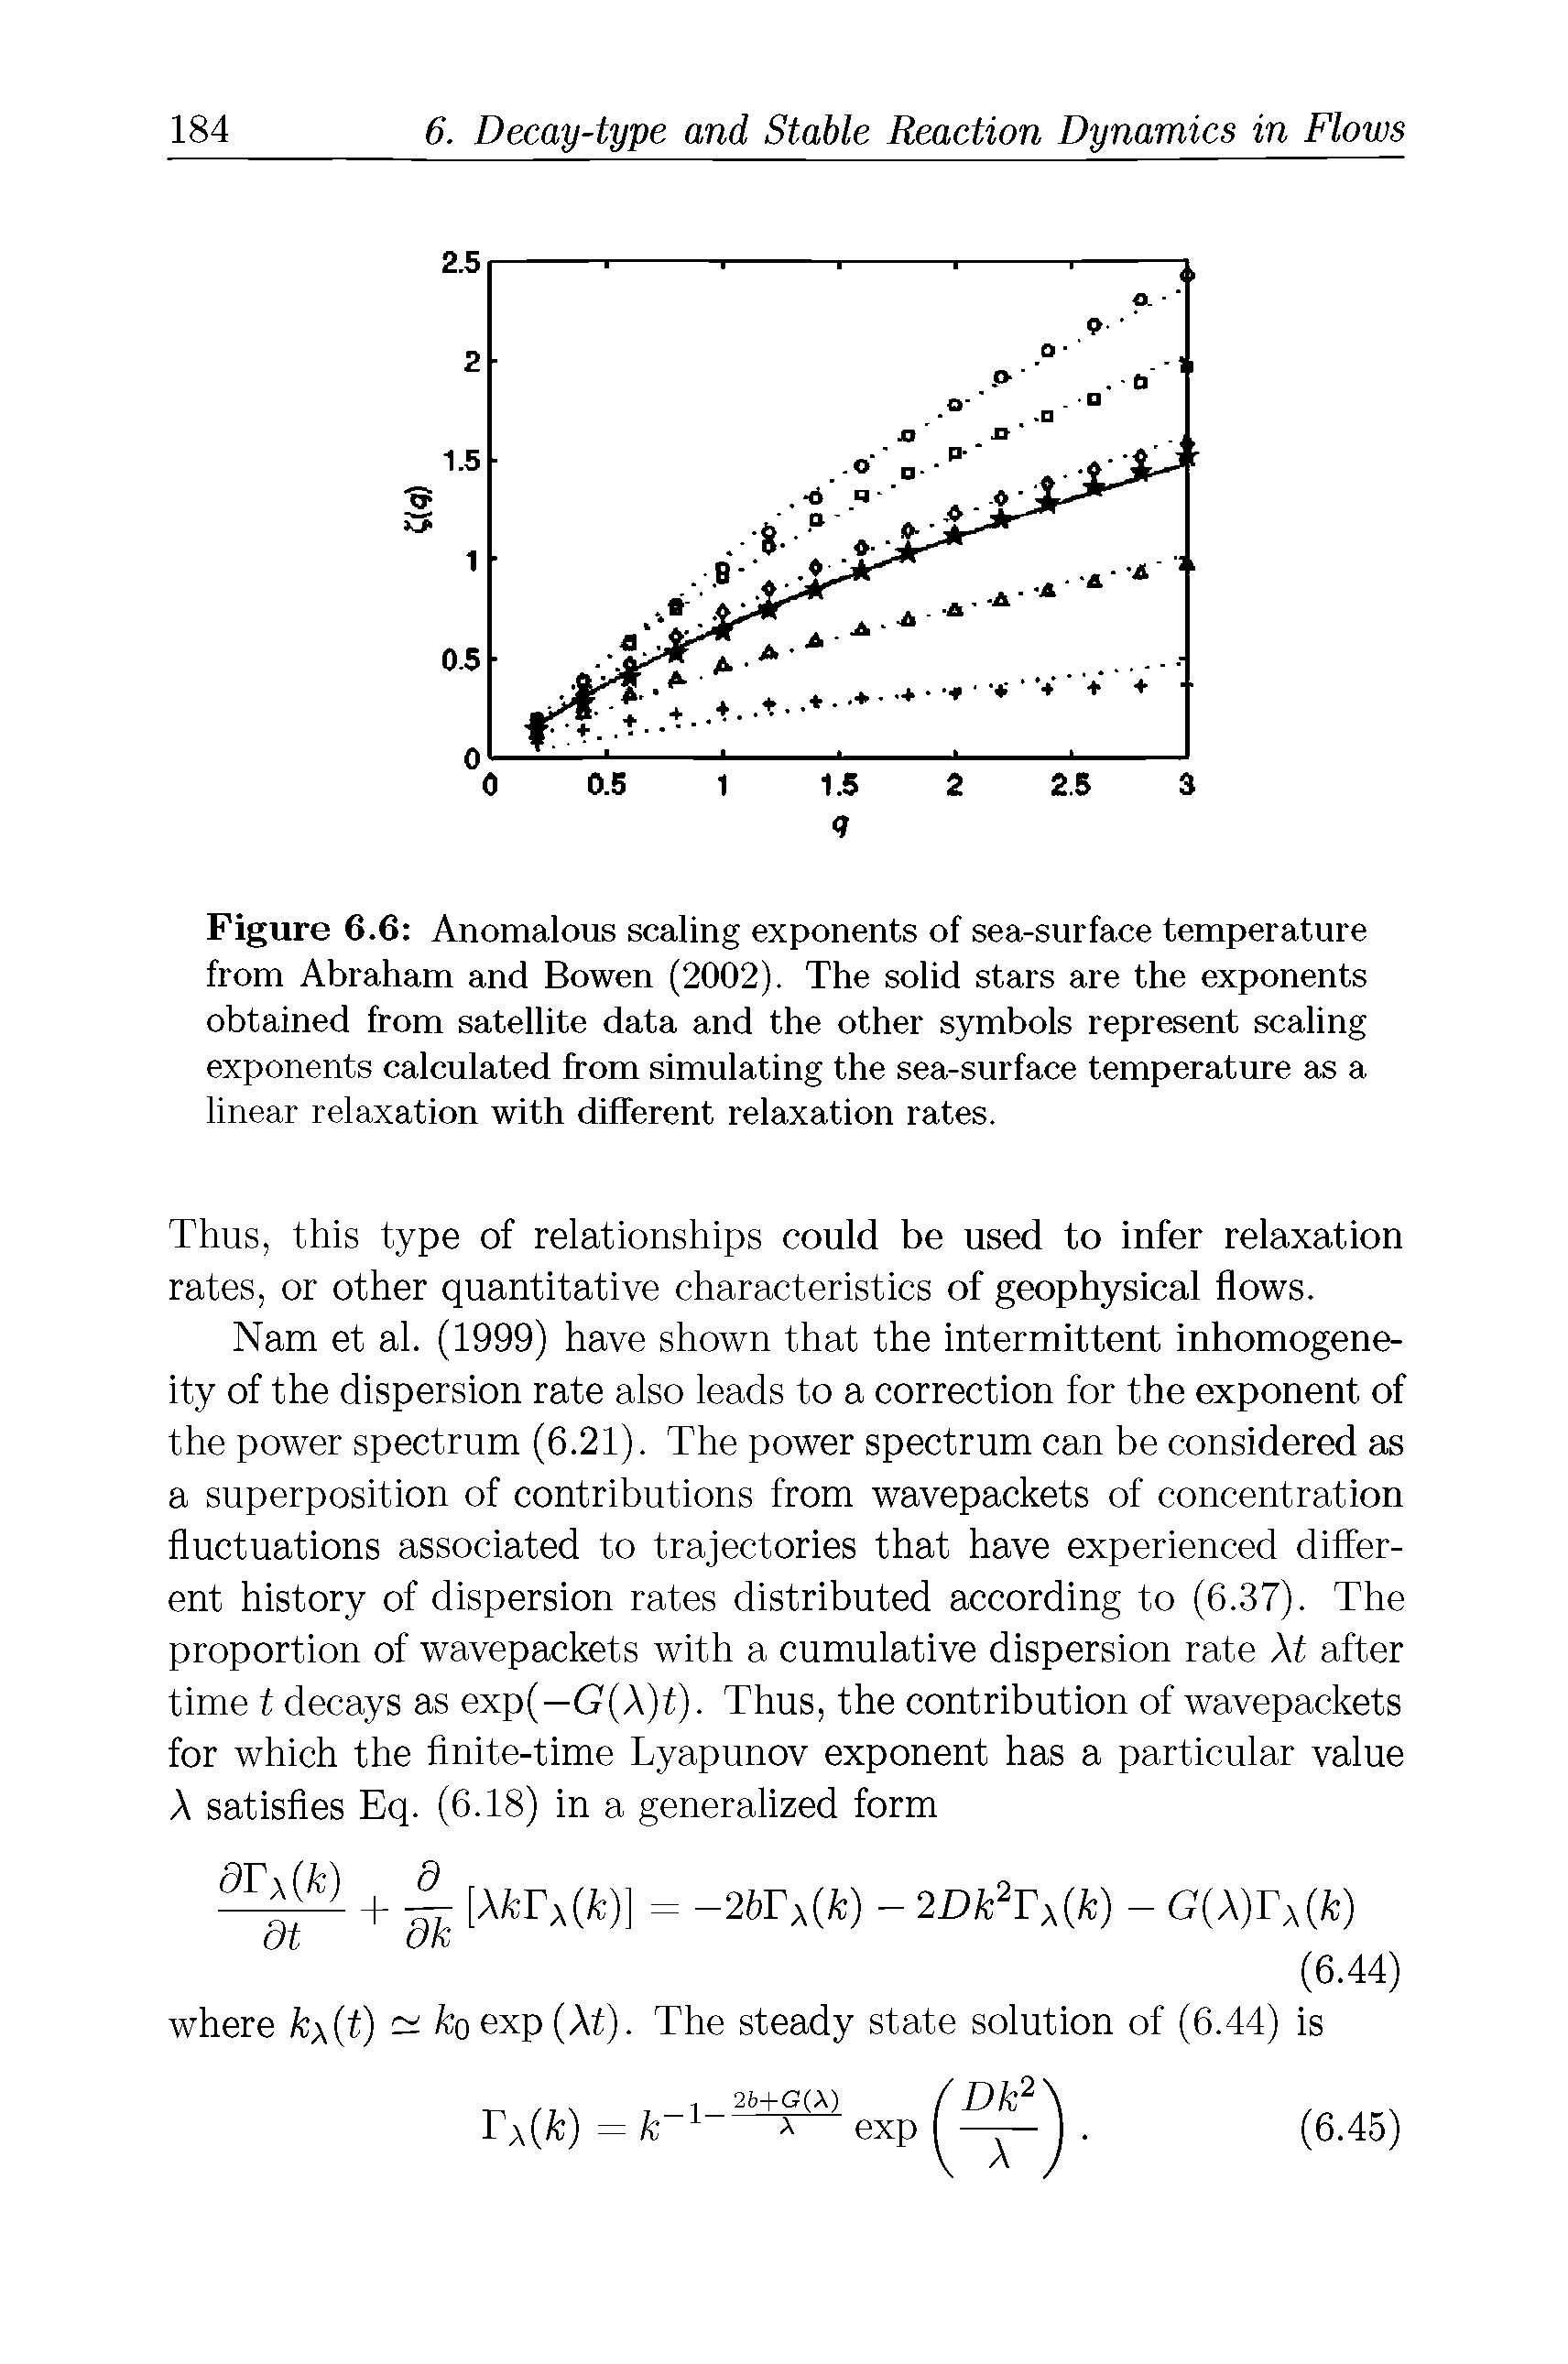 Figure 6.6 Anomalous scaling exponents of sea-surface temperature from Abraham and Bowen (2002). The solid stars are the exponents obtained from satellite data and the other symbols represent scaling exponents calculated from simulating the sea-surface temperature as a linear relaxation with different relaxation rates.